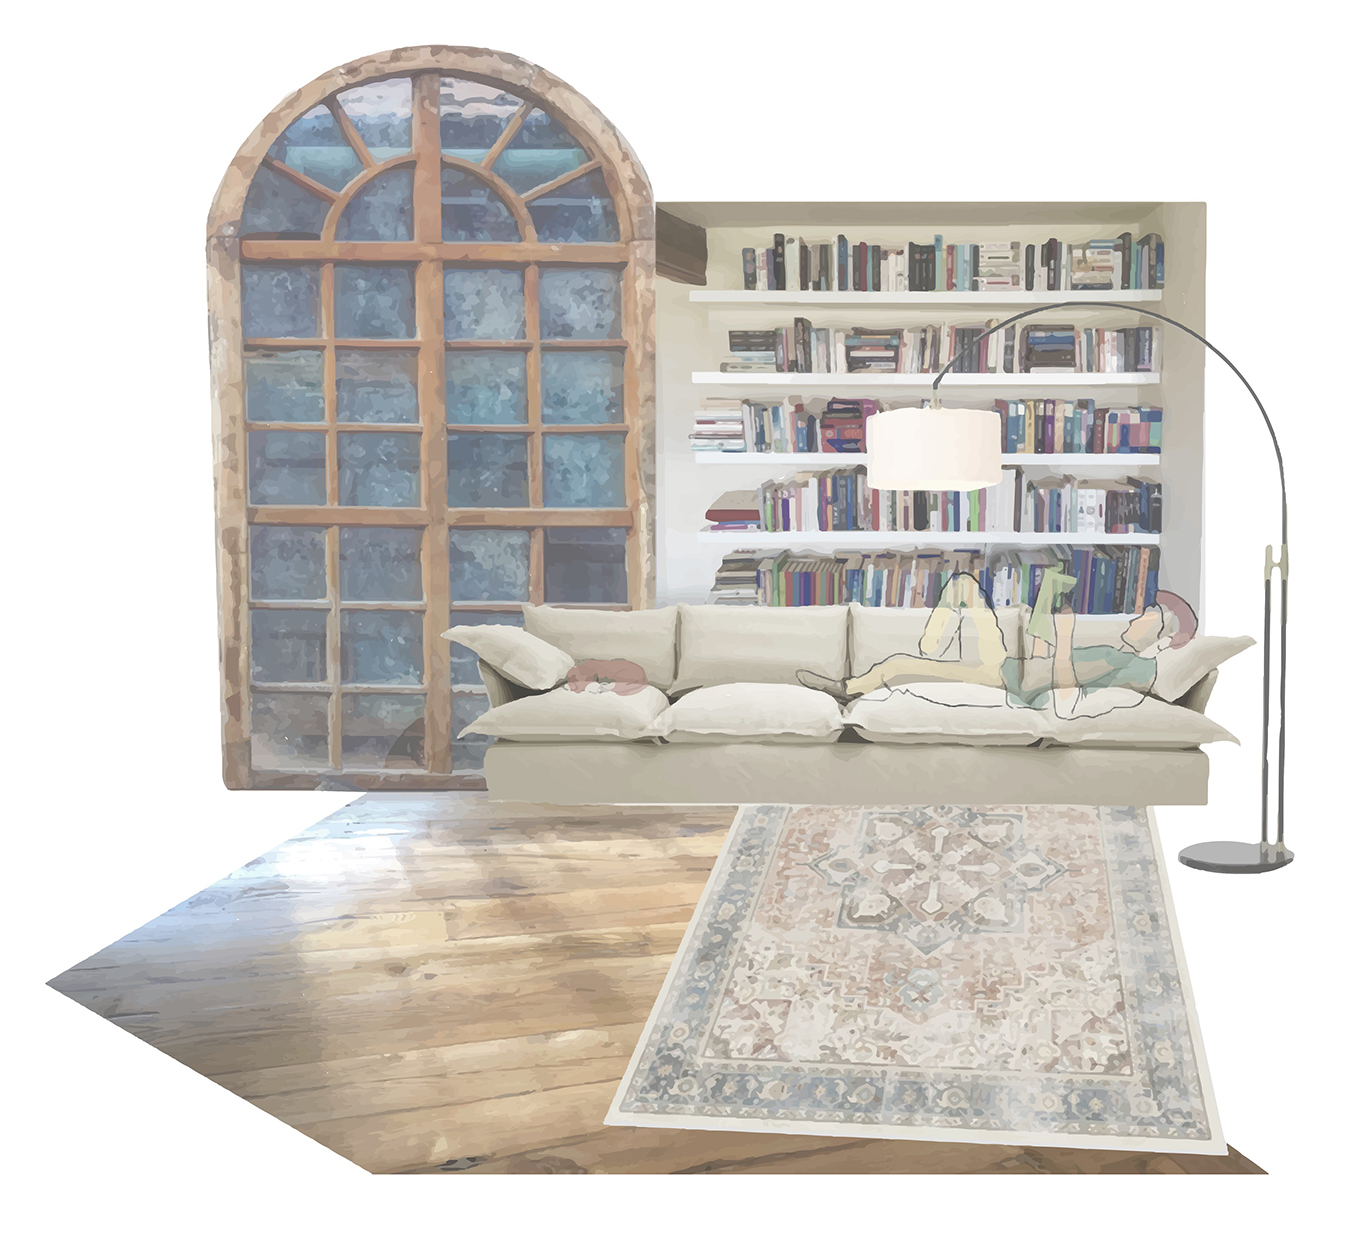 Creme sofa in an old factory living room with bookcase being and large arge window and rug underneath.